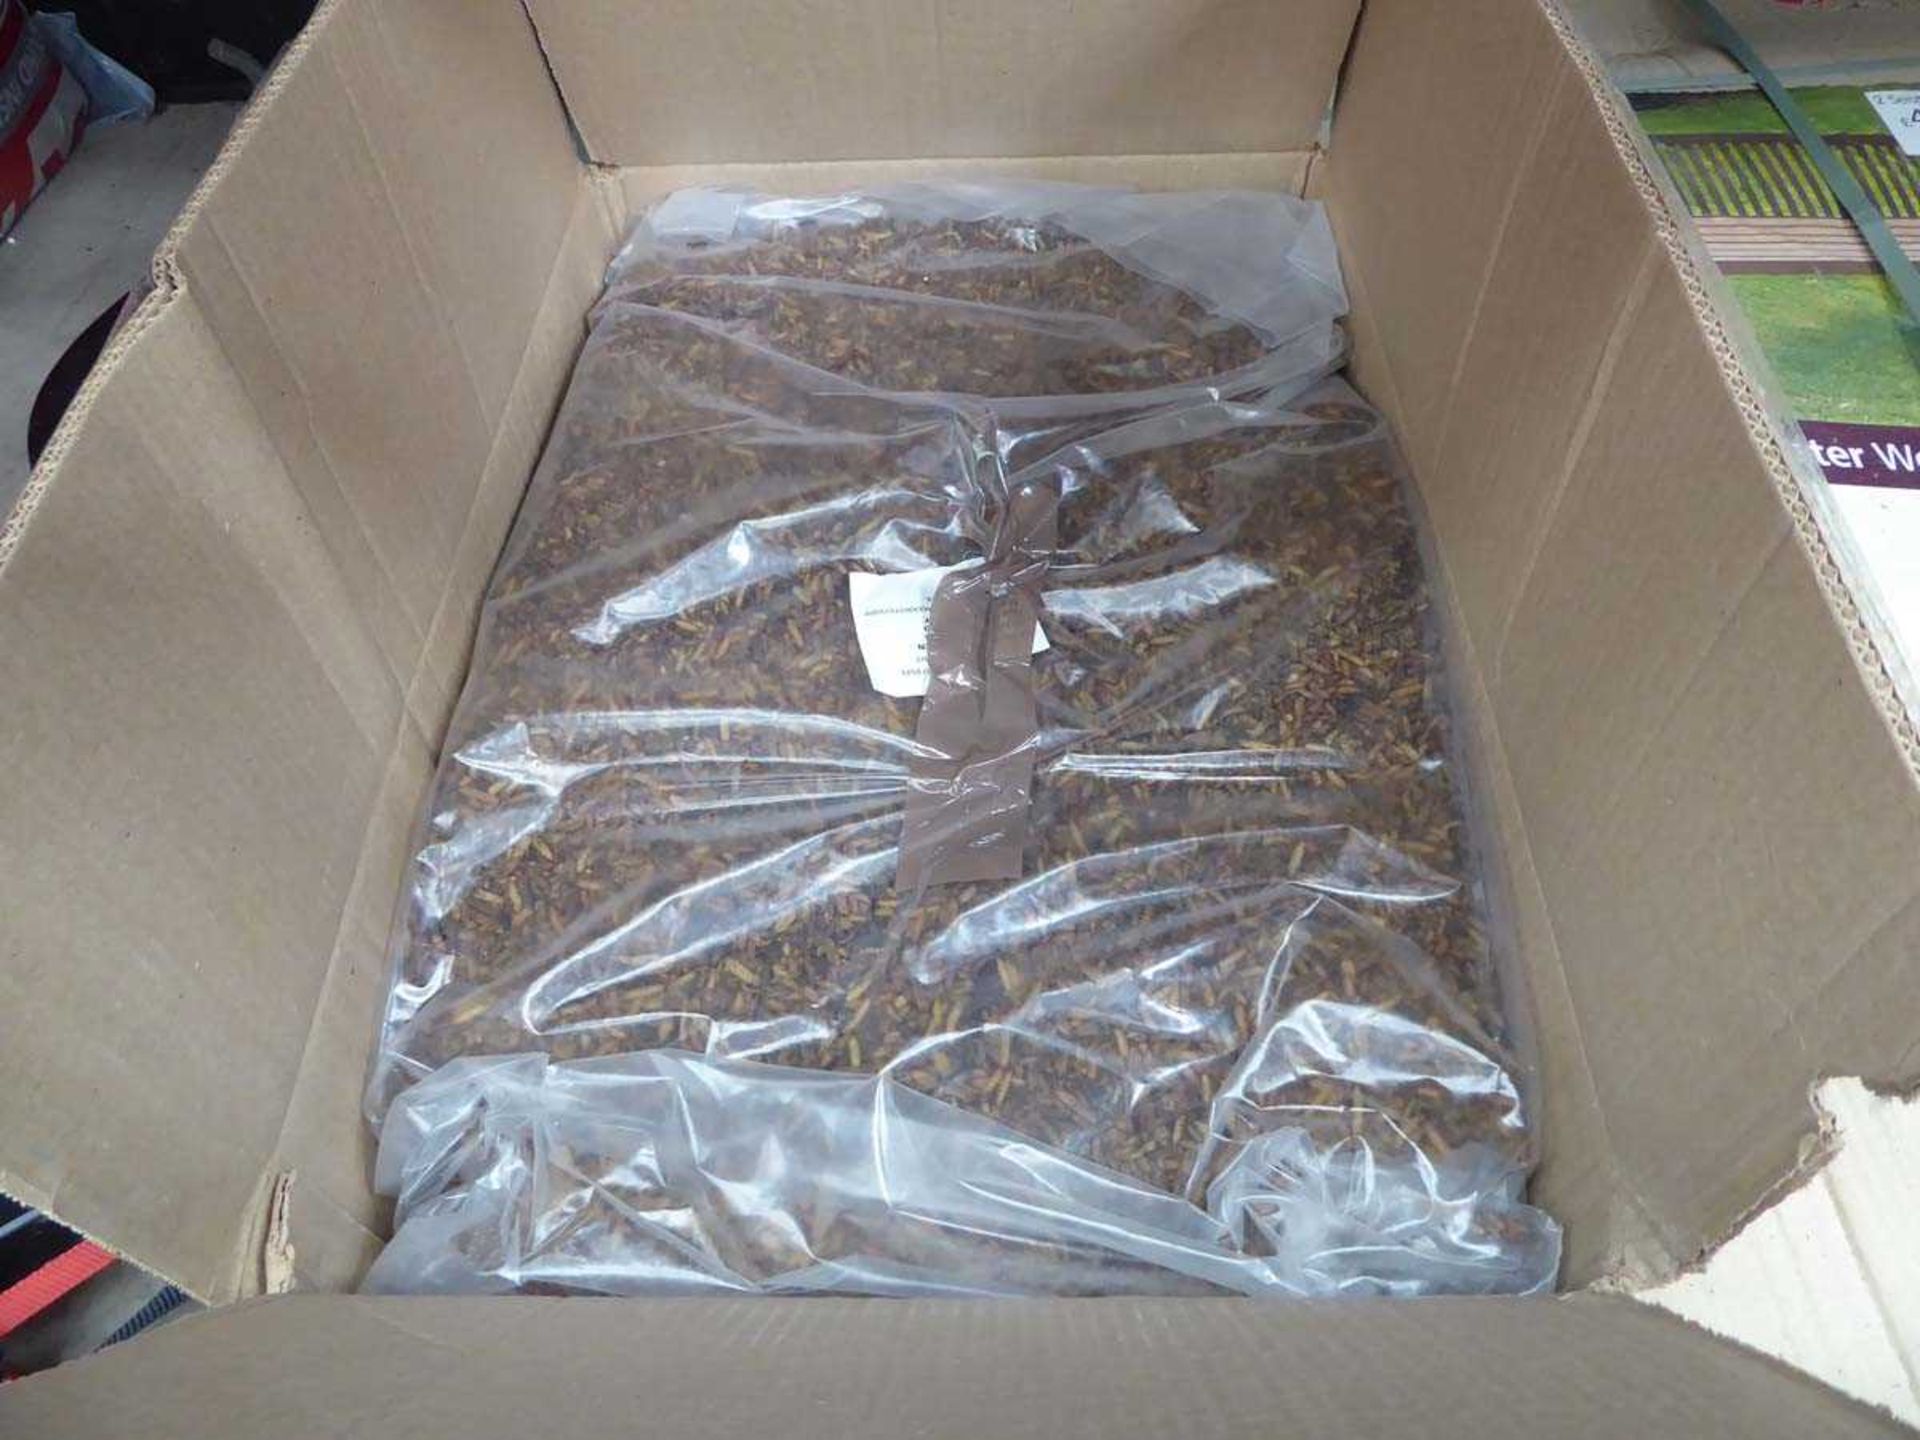 +VAT Box containing meal worms